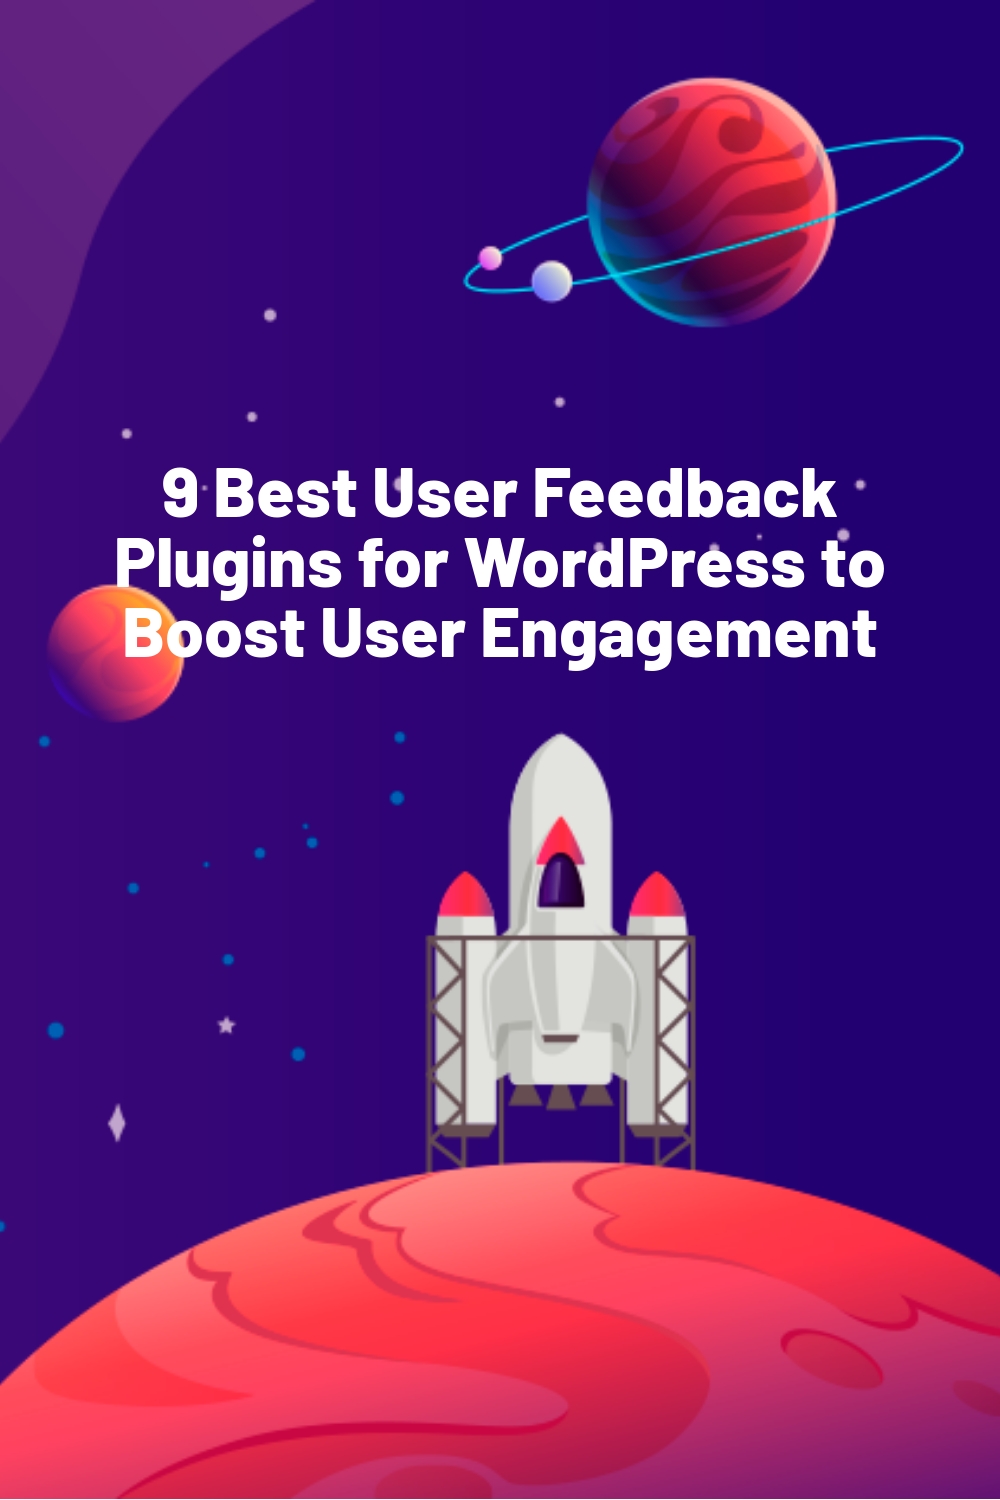 9 Best User Feedback Plugins for WordPress to Boost User Engagement